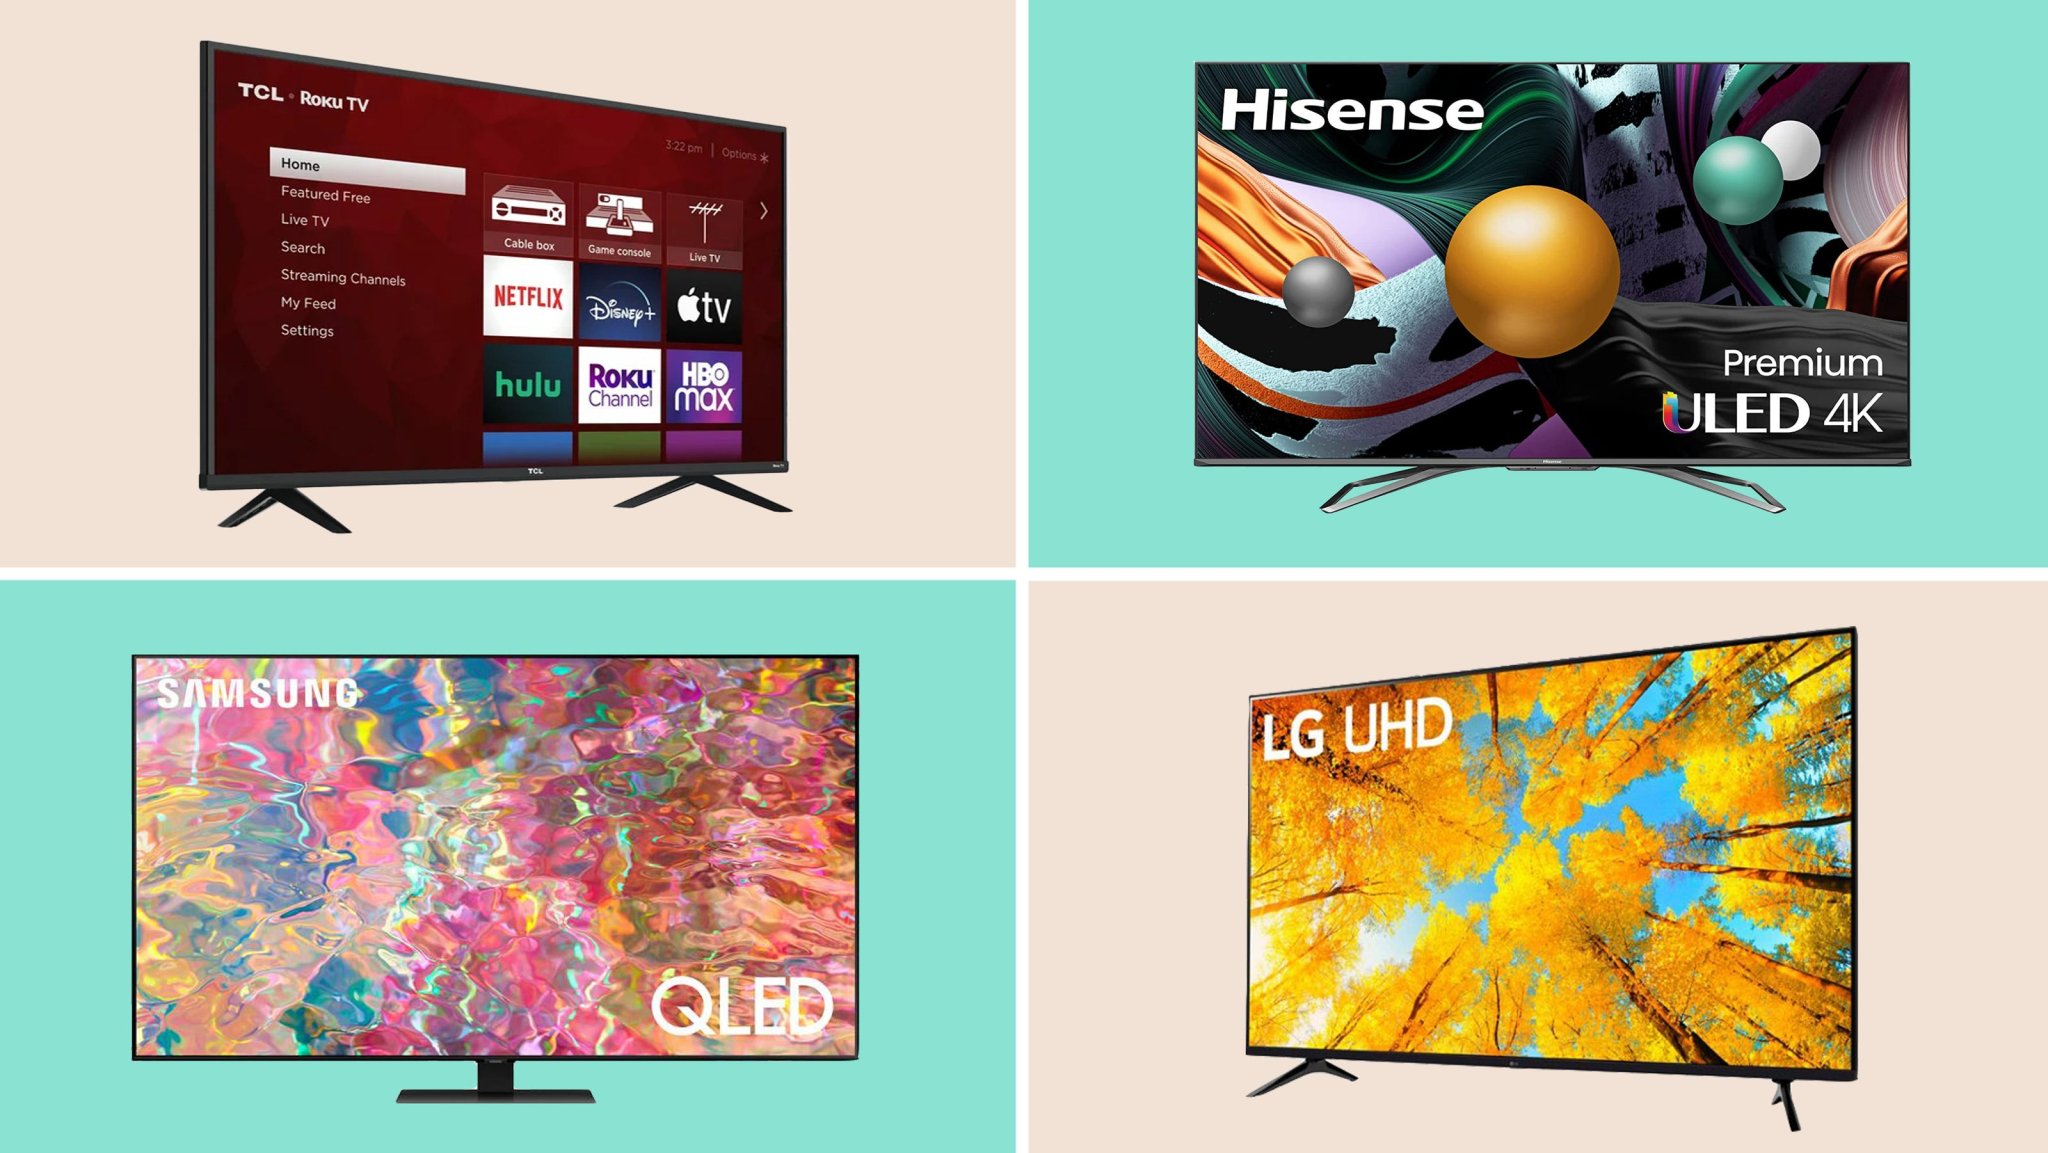 Get ready for football season with the best TV deals from LG, TCL, Samsung and more